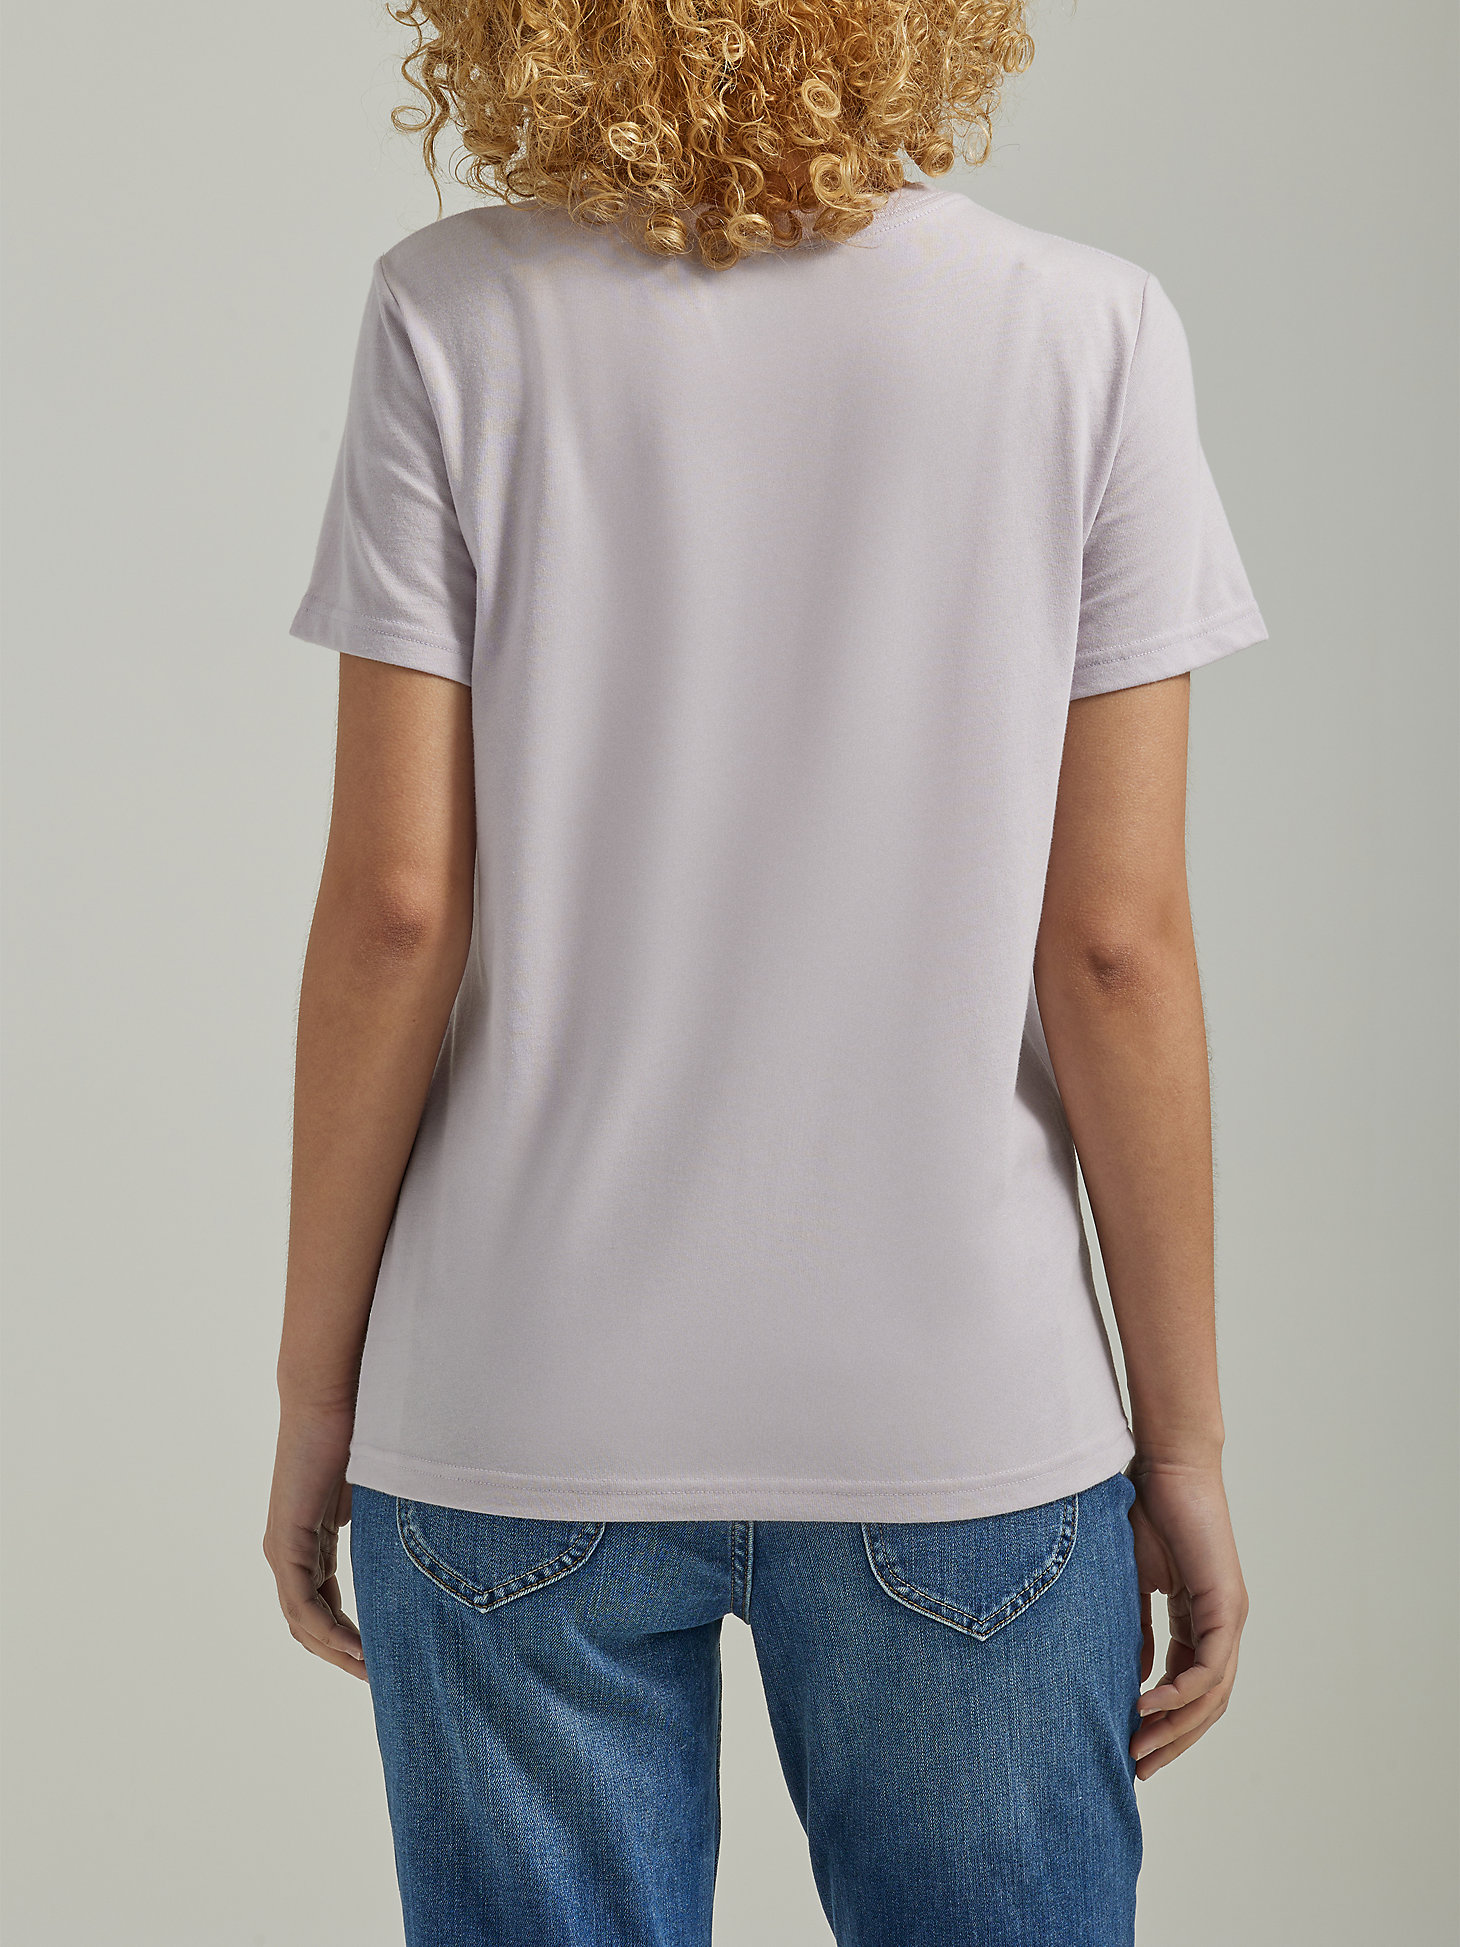 Women's Choose Kindness Graphic Tee in Misty Lilac alternative view 1